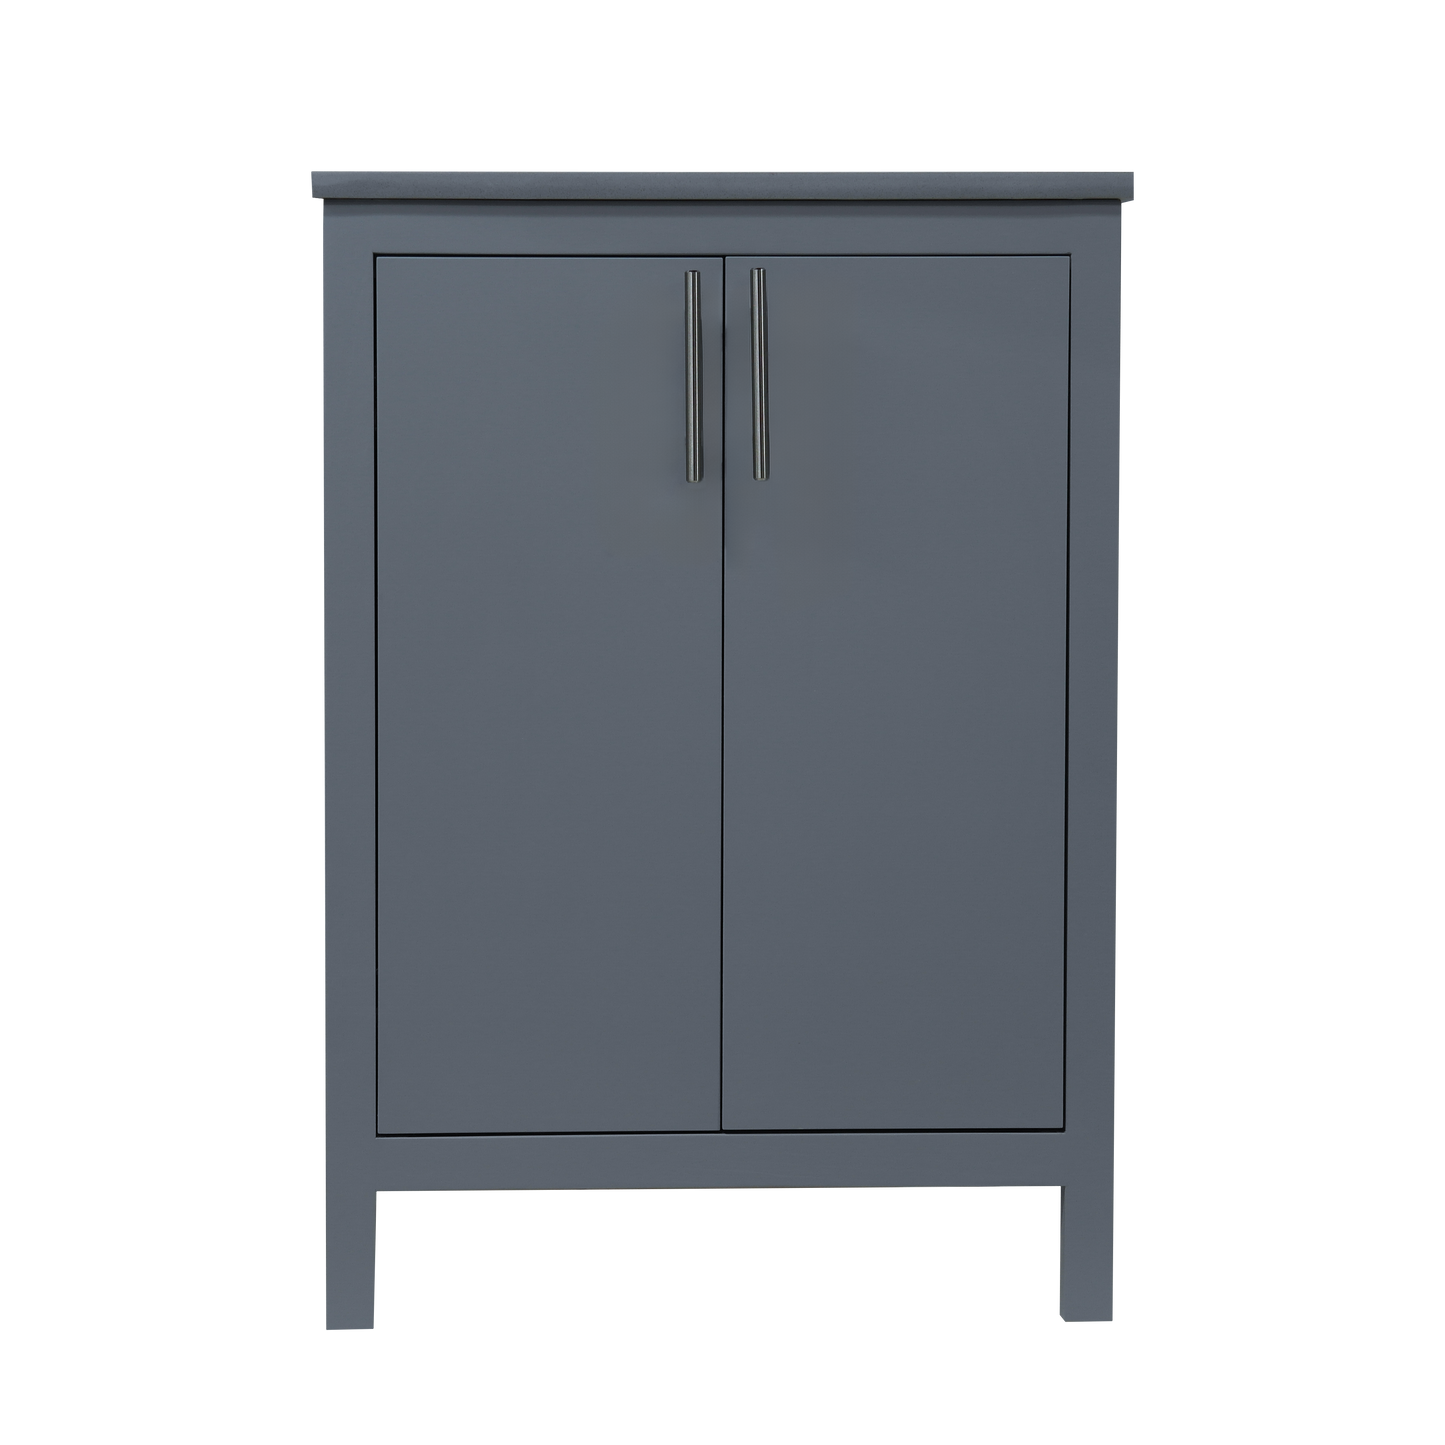 24" bathroom w00d cabinet in fog grey with Quartz top and sink